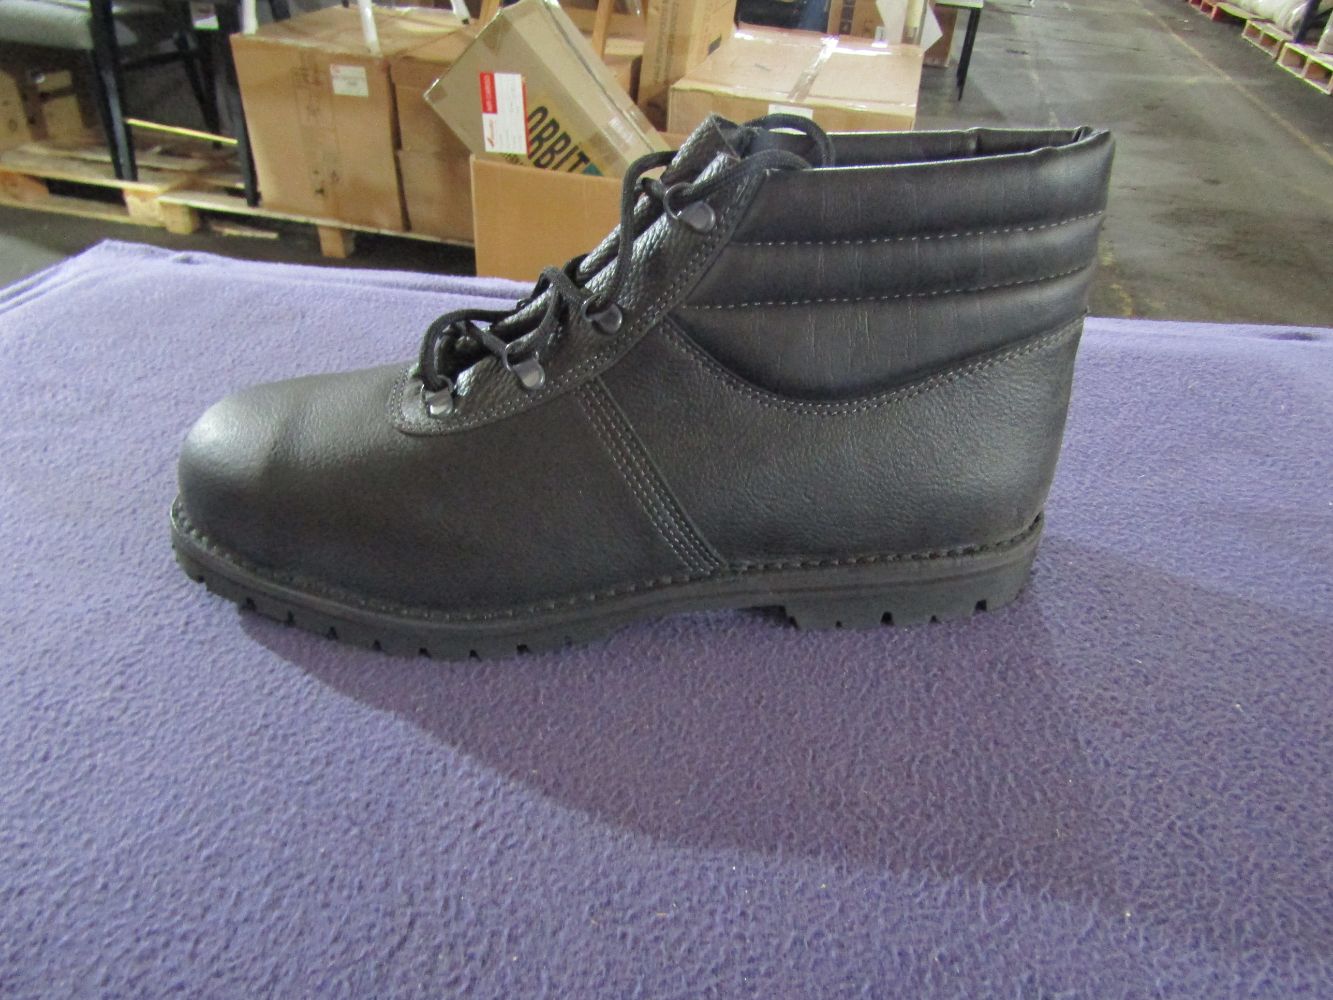 Auction of Workwear - Steel-Toe Cap Boots, Trainers, Clothing & More!